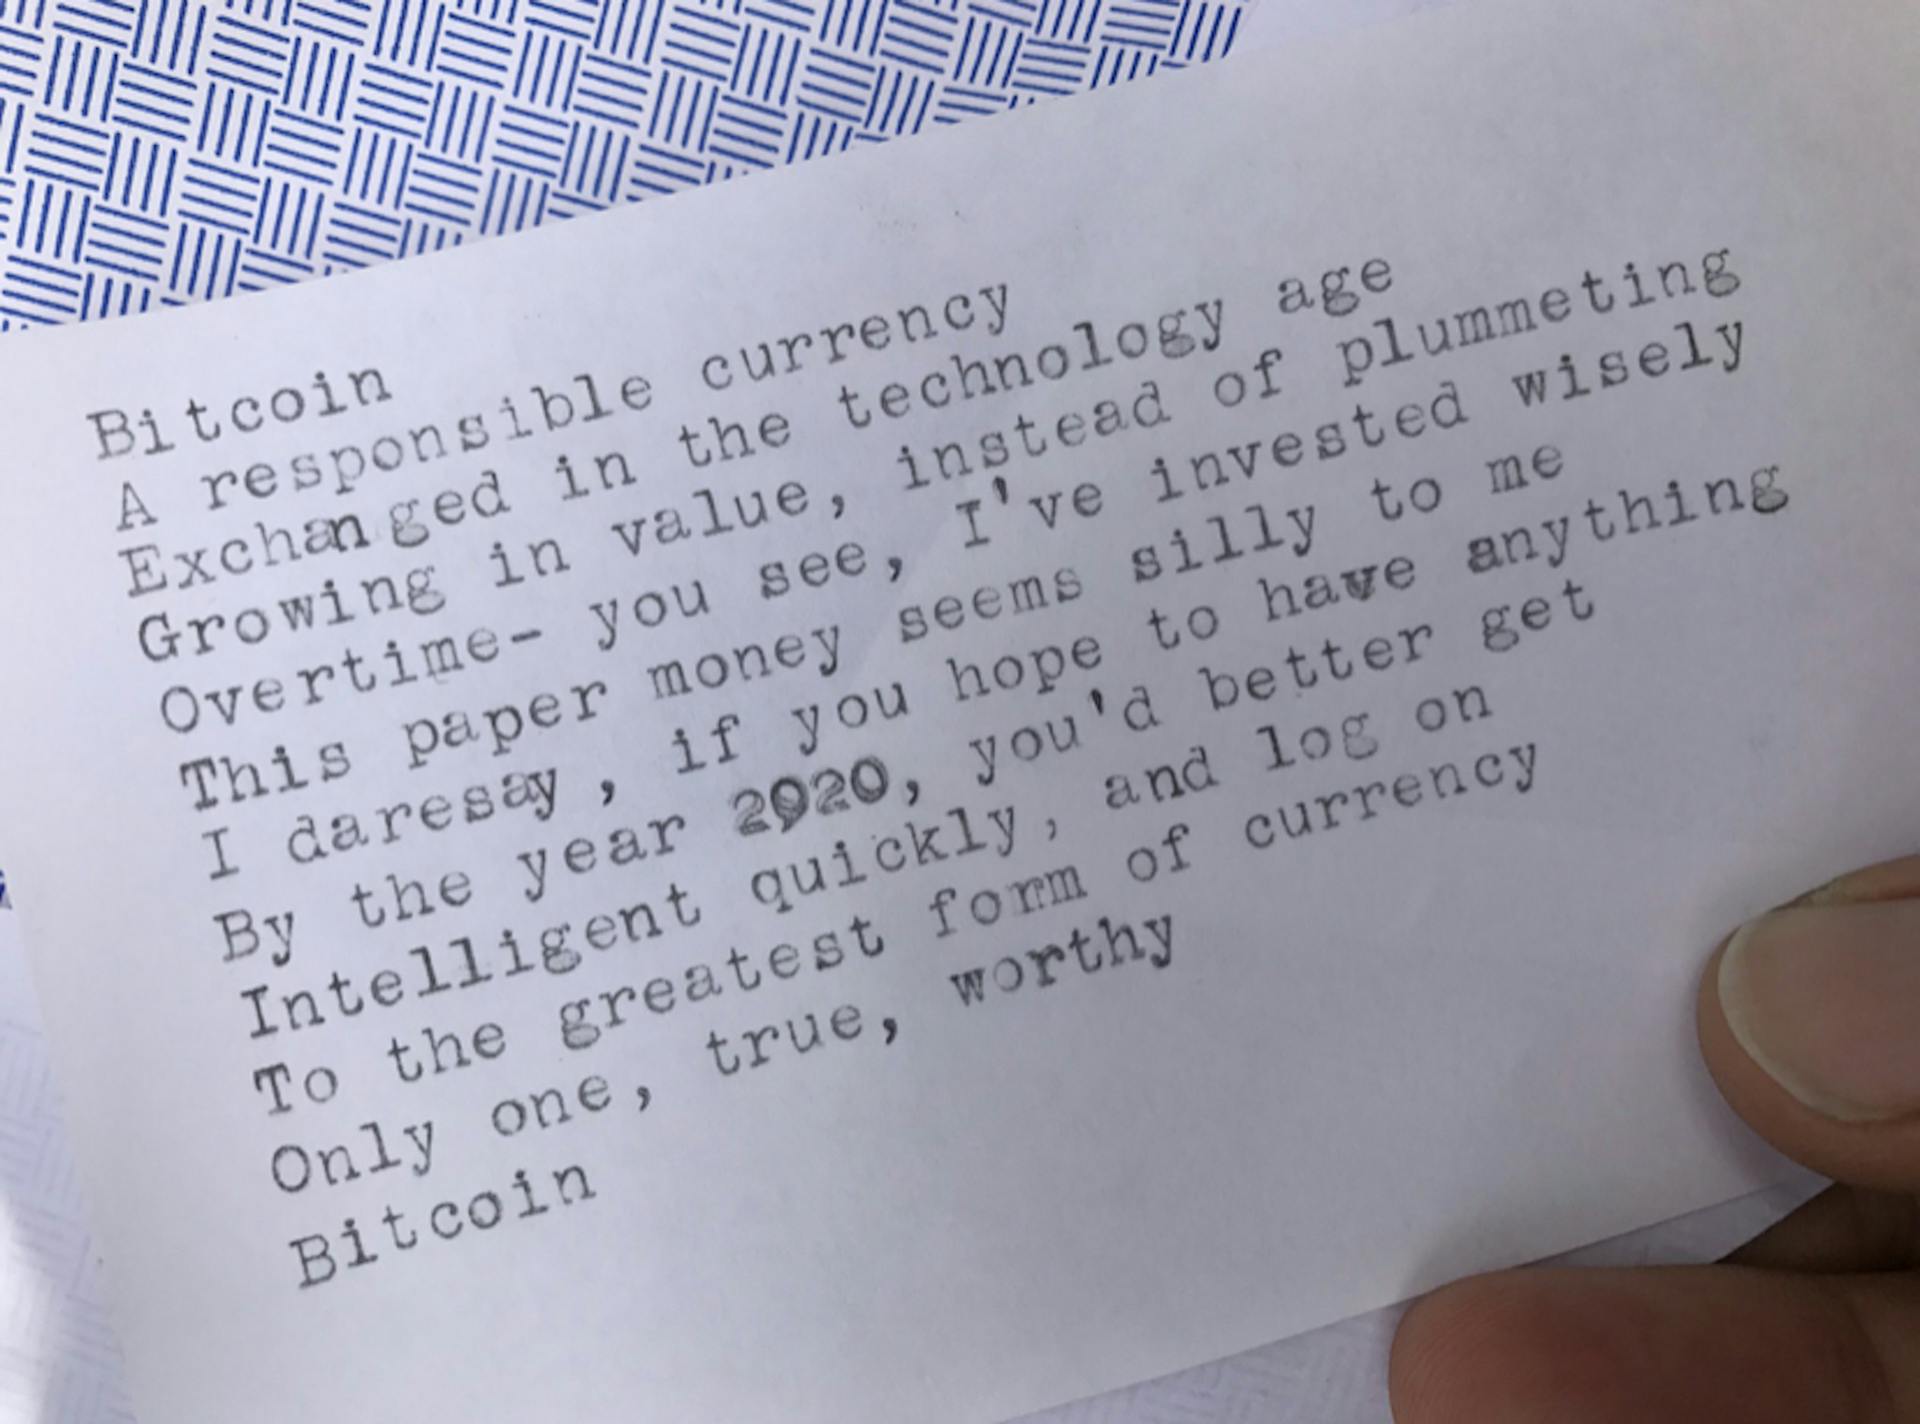 According to @MadBitcoins on Twitter he gave the topic Bitcoin to a poet and received this typewriter one as pictured back in 2017